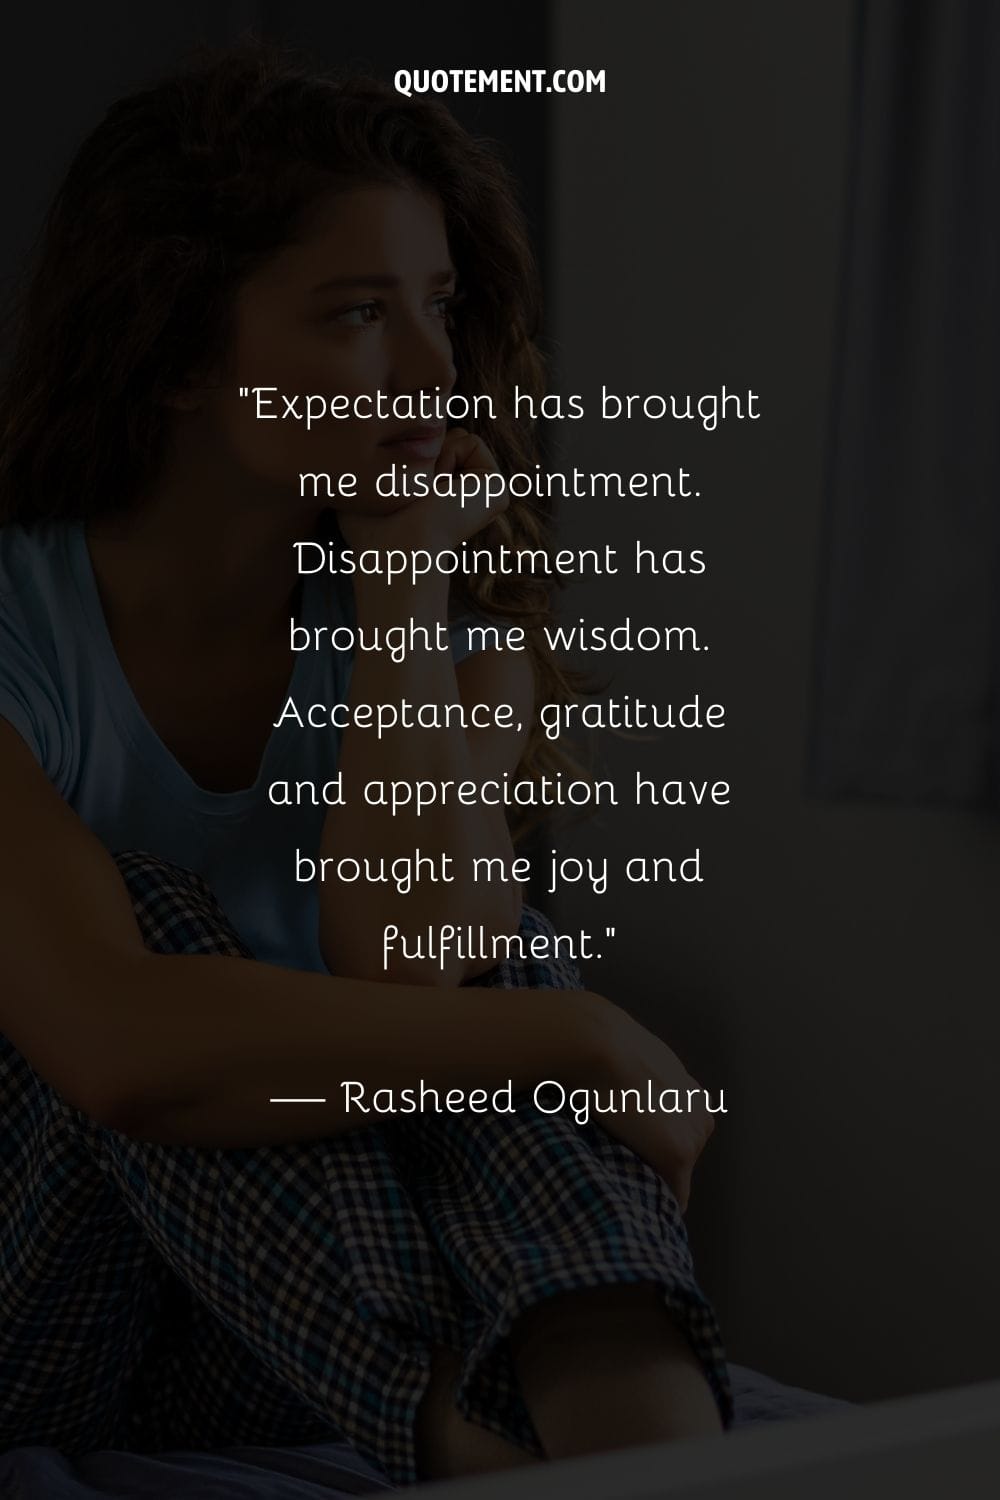 Disappointment has brought me wisdom. Acceptance, gratitude and appreciation have brought me joy and fulfillment